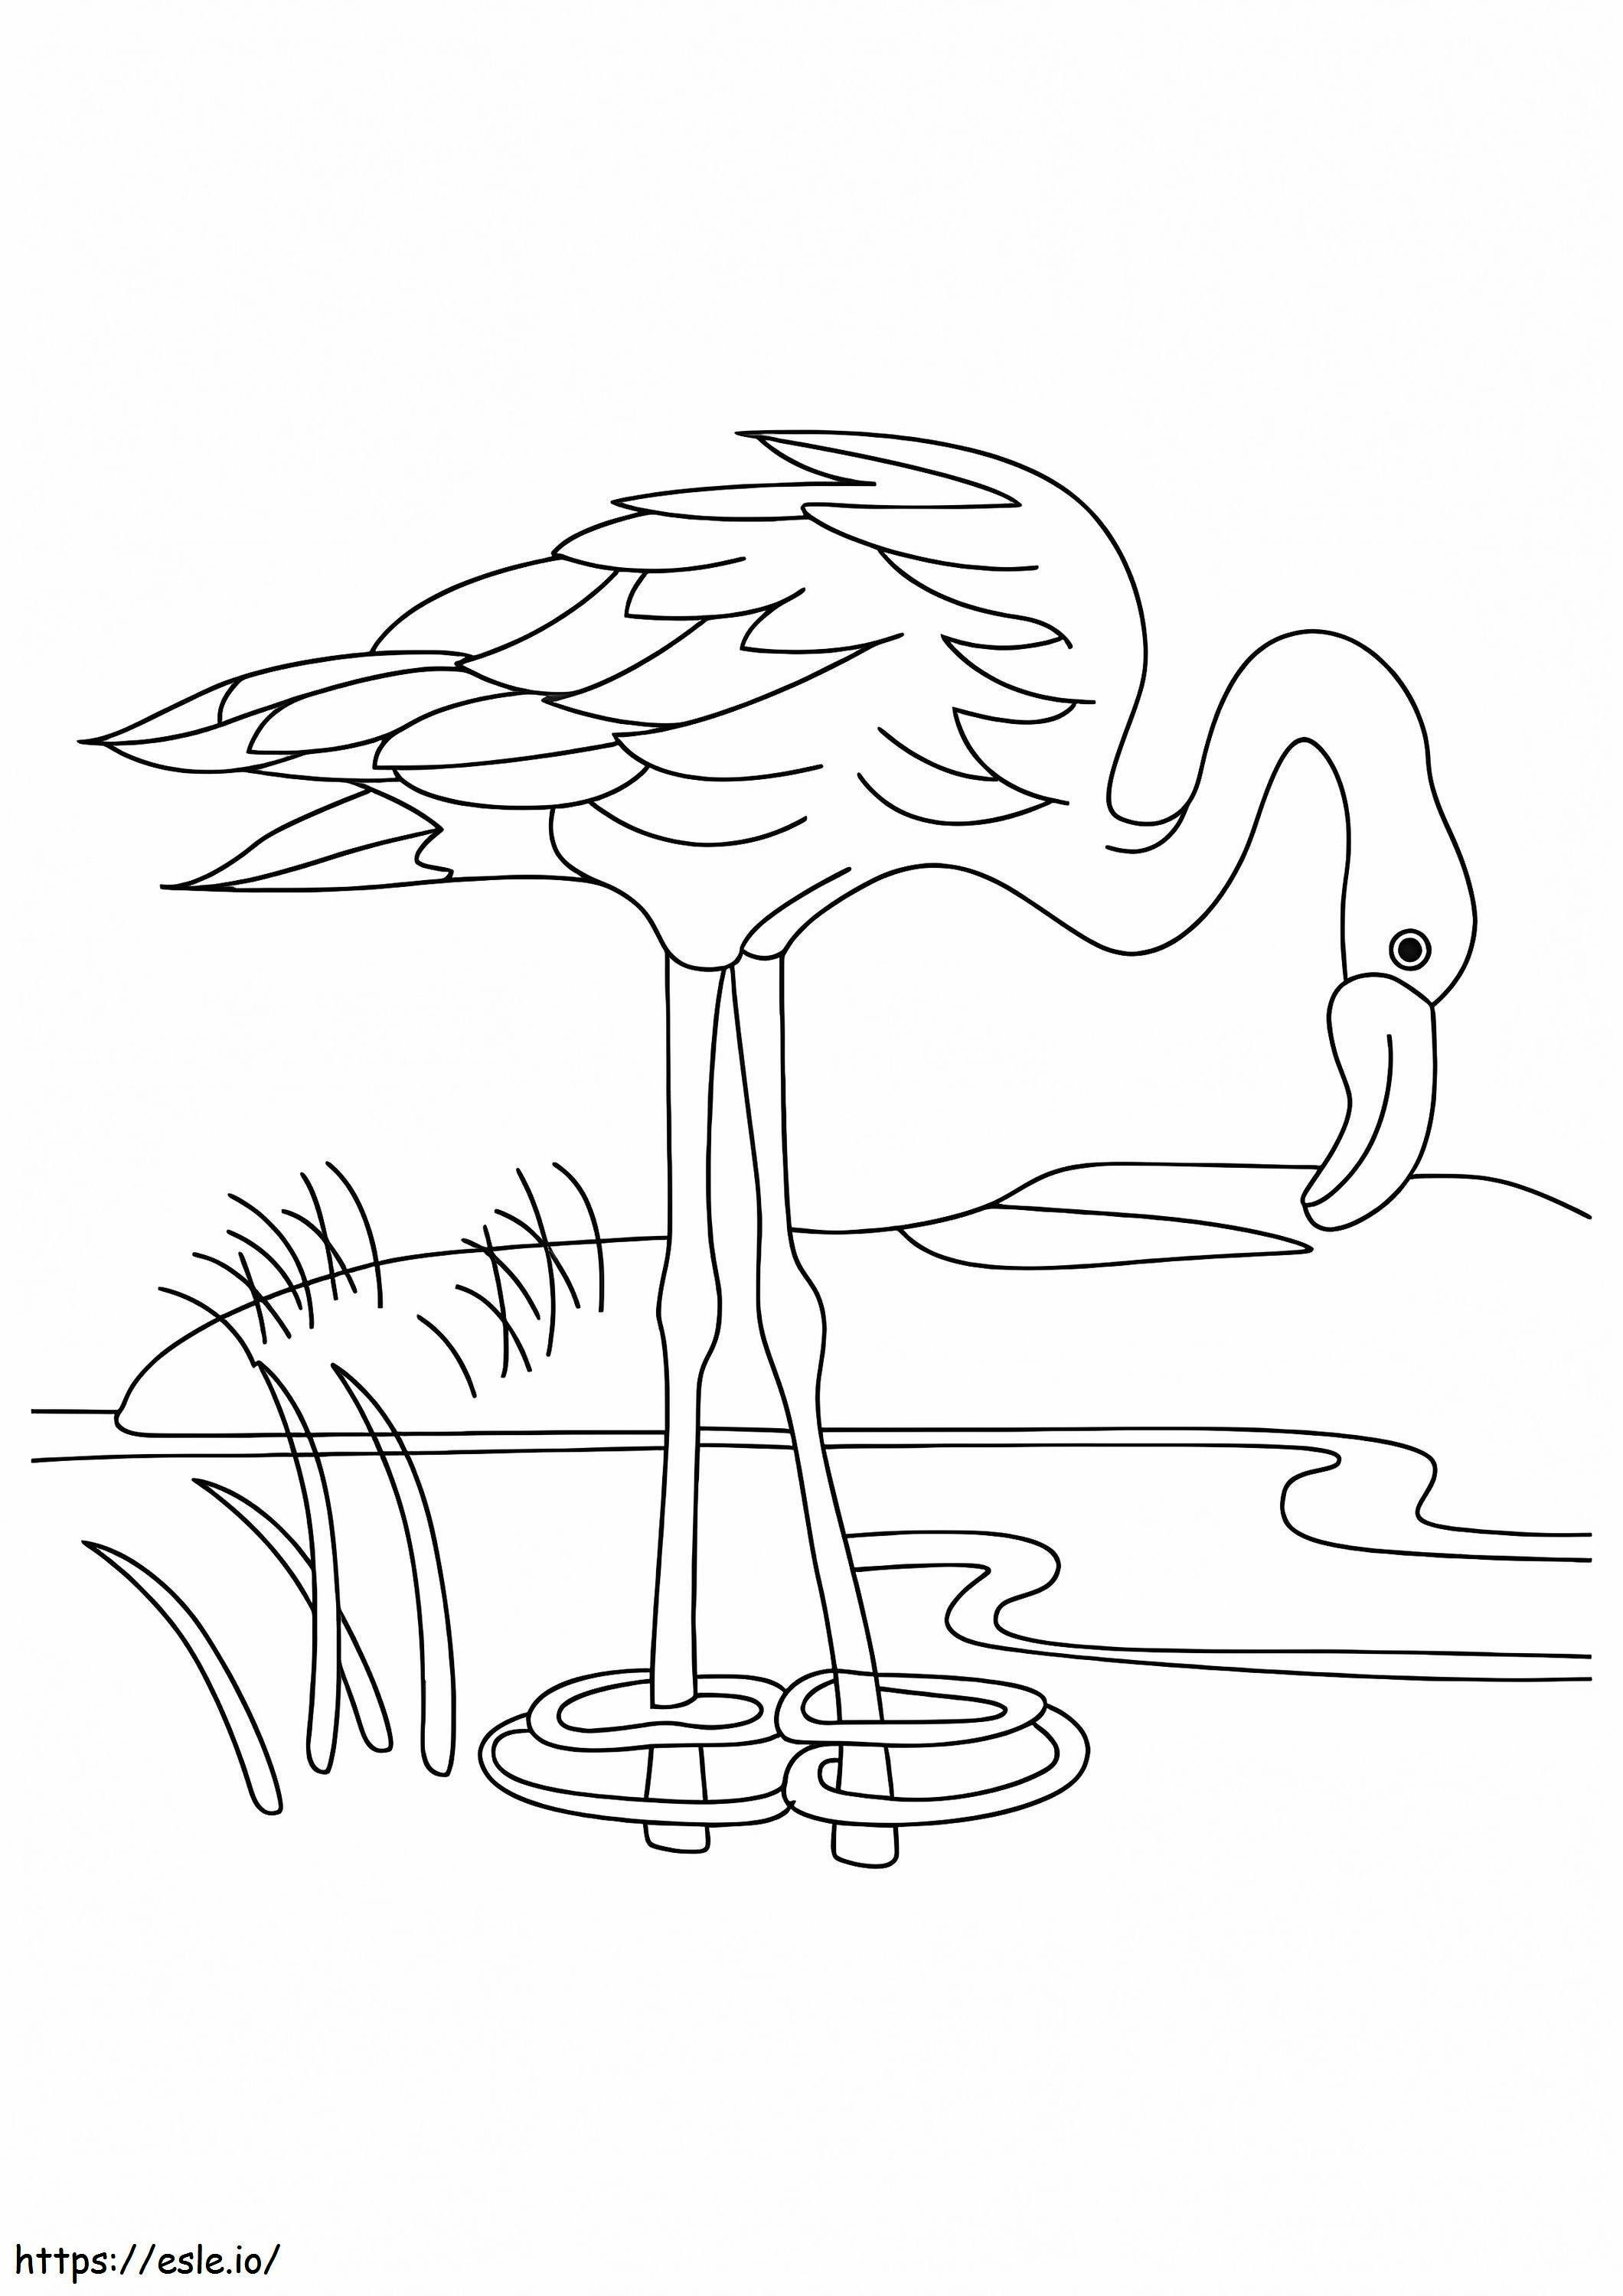 1526460412 A Flamingo Drinking Water From The Lake A4 coloring page